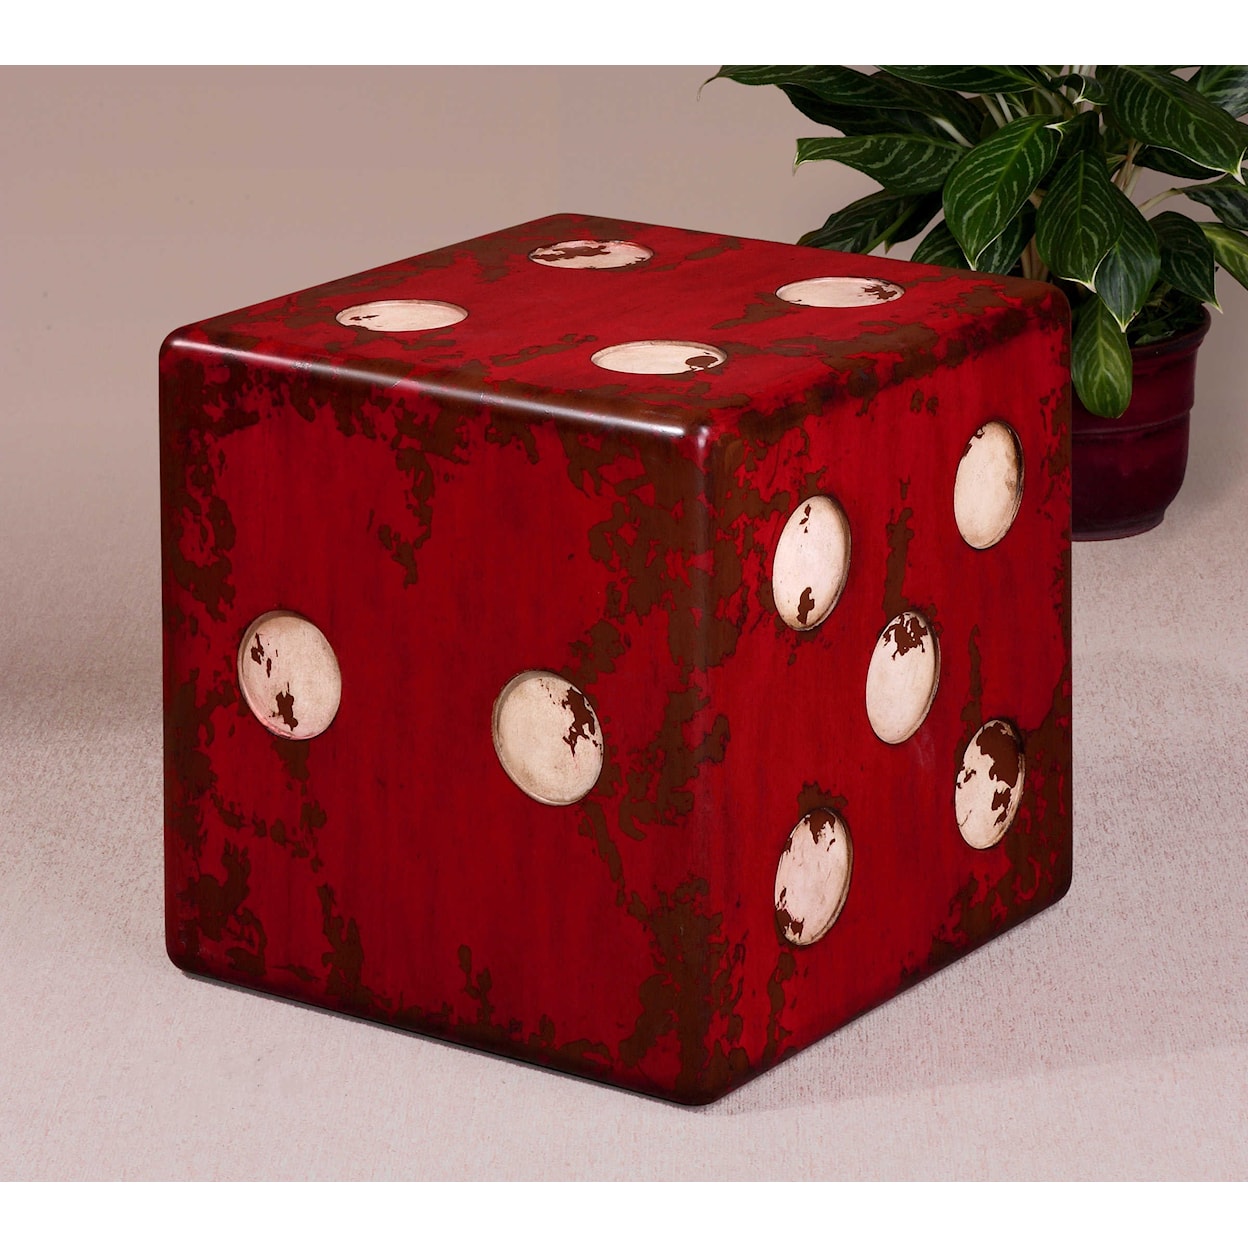 Uttermost Accent Furniture - Occasional Tables Dice Accent Table